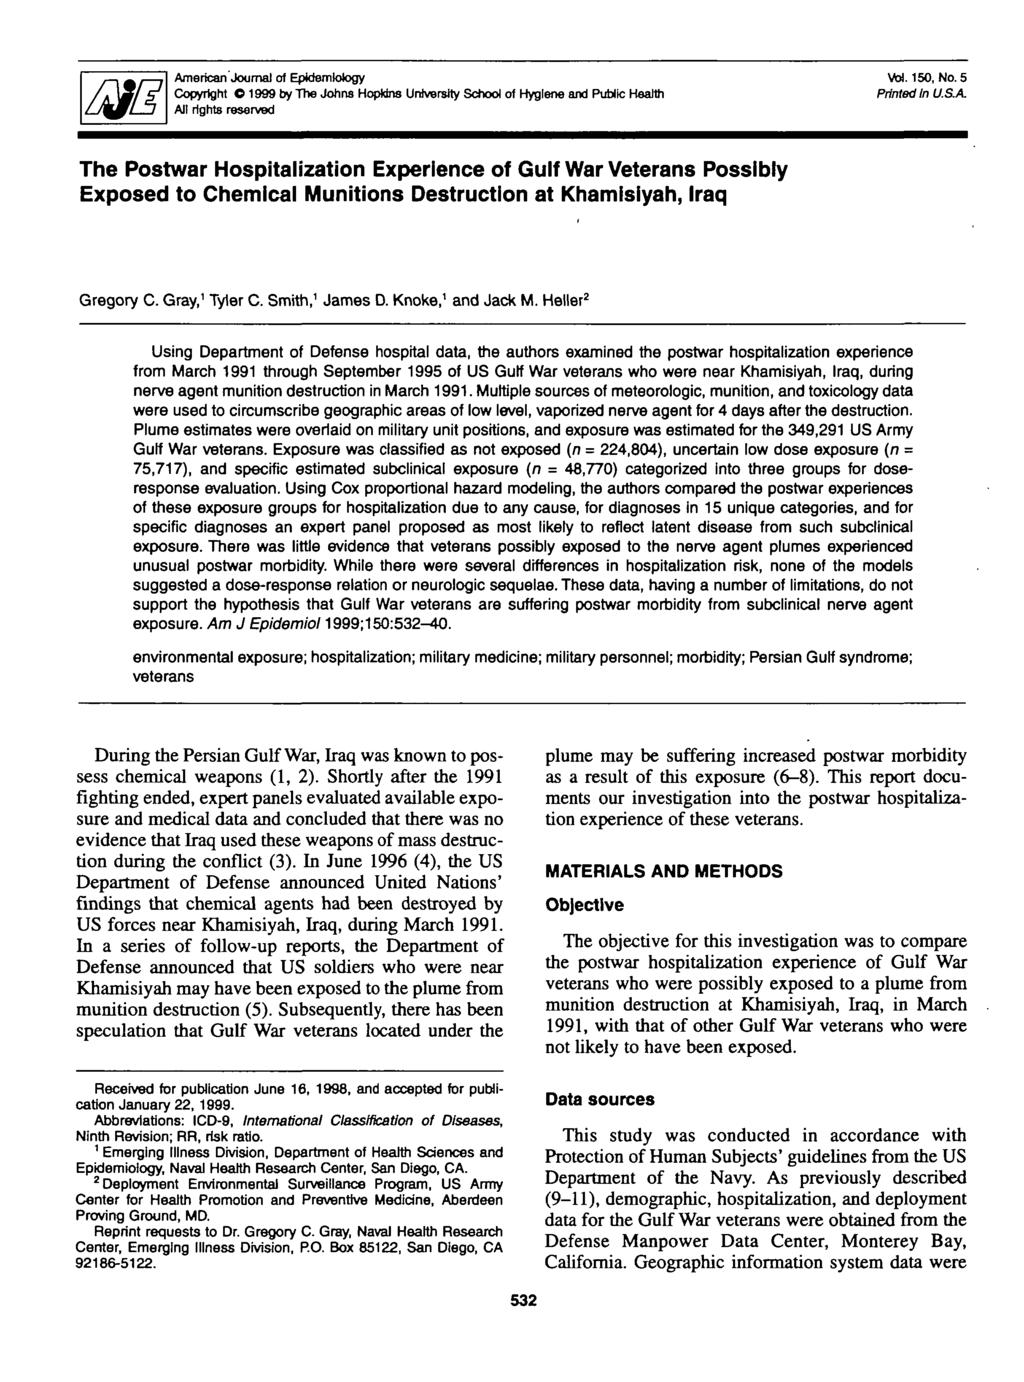 American Journal of Epidemiology Copyright 01999 by The Johns Hopkins University School of Hygiene and Public Health All rights reserved vol. 150, No. 5 Printed In U.SA.